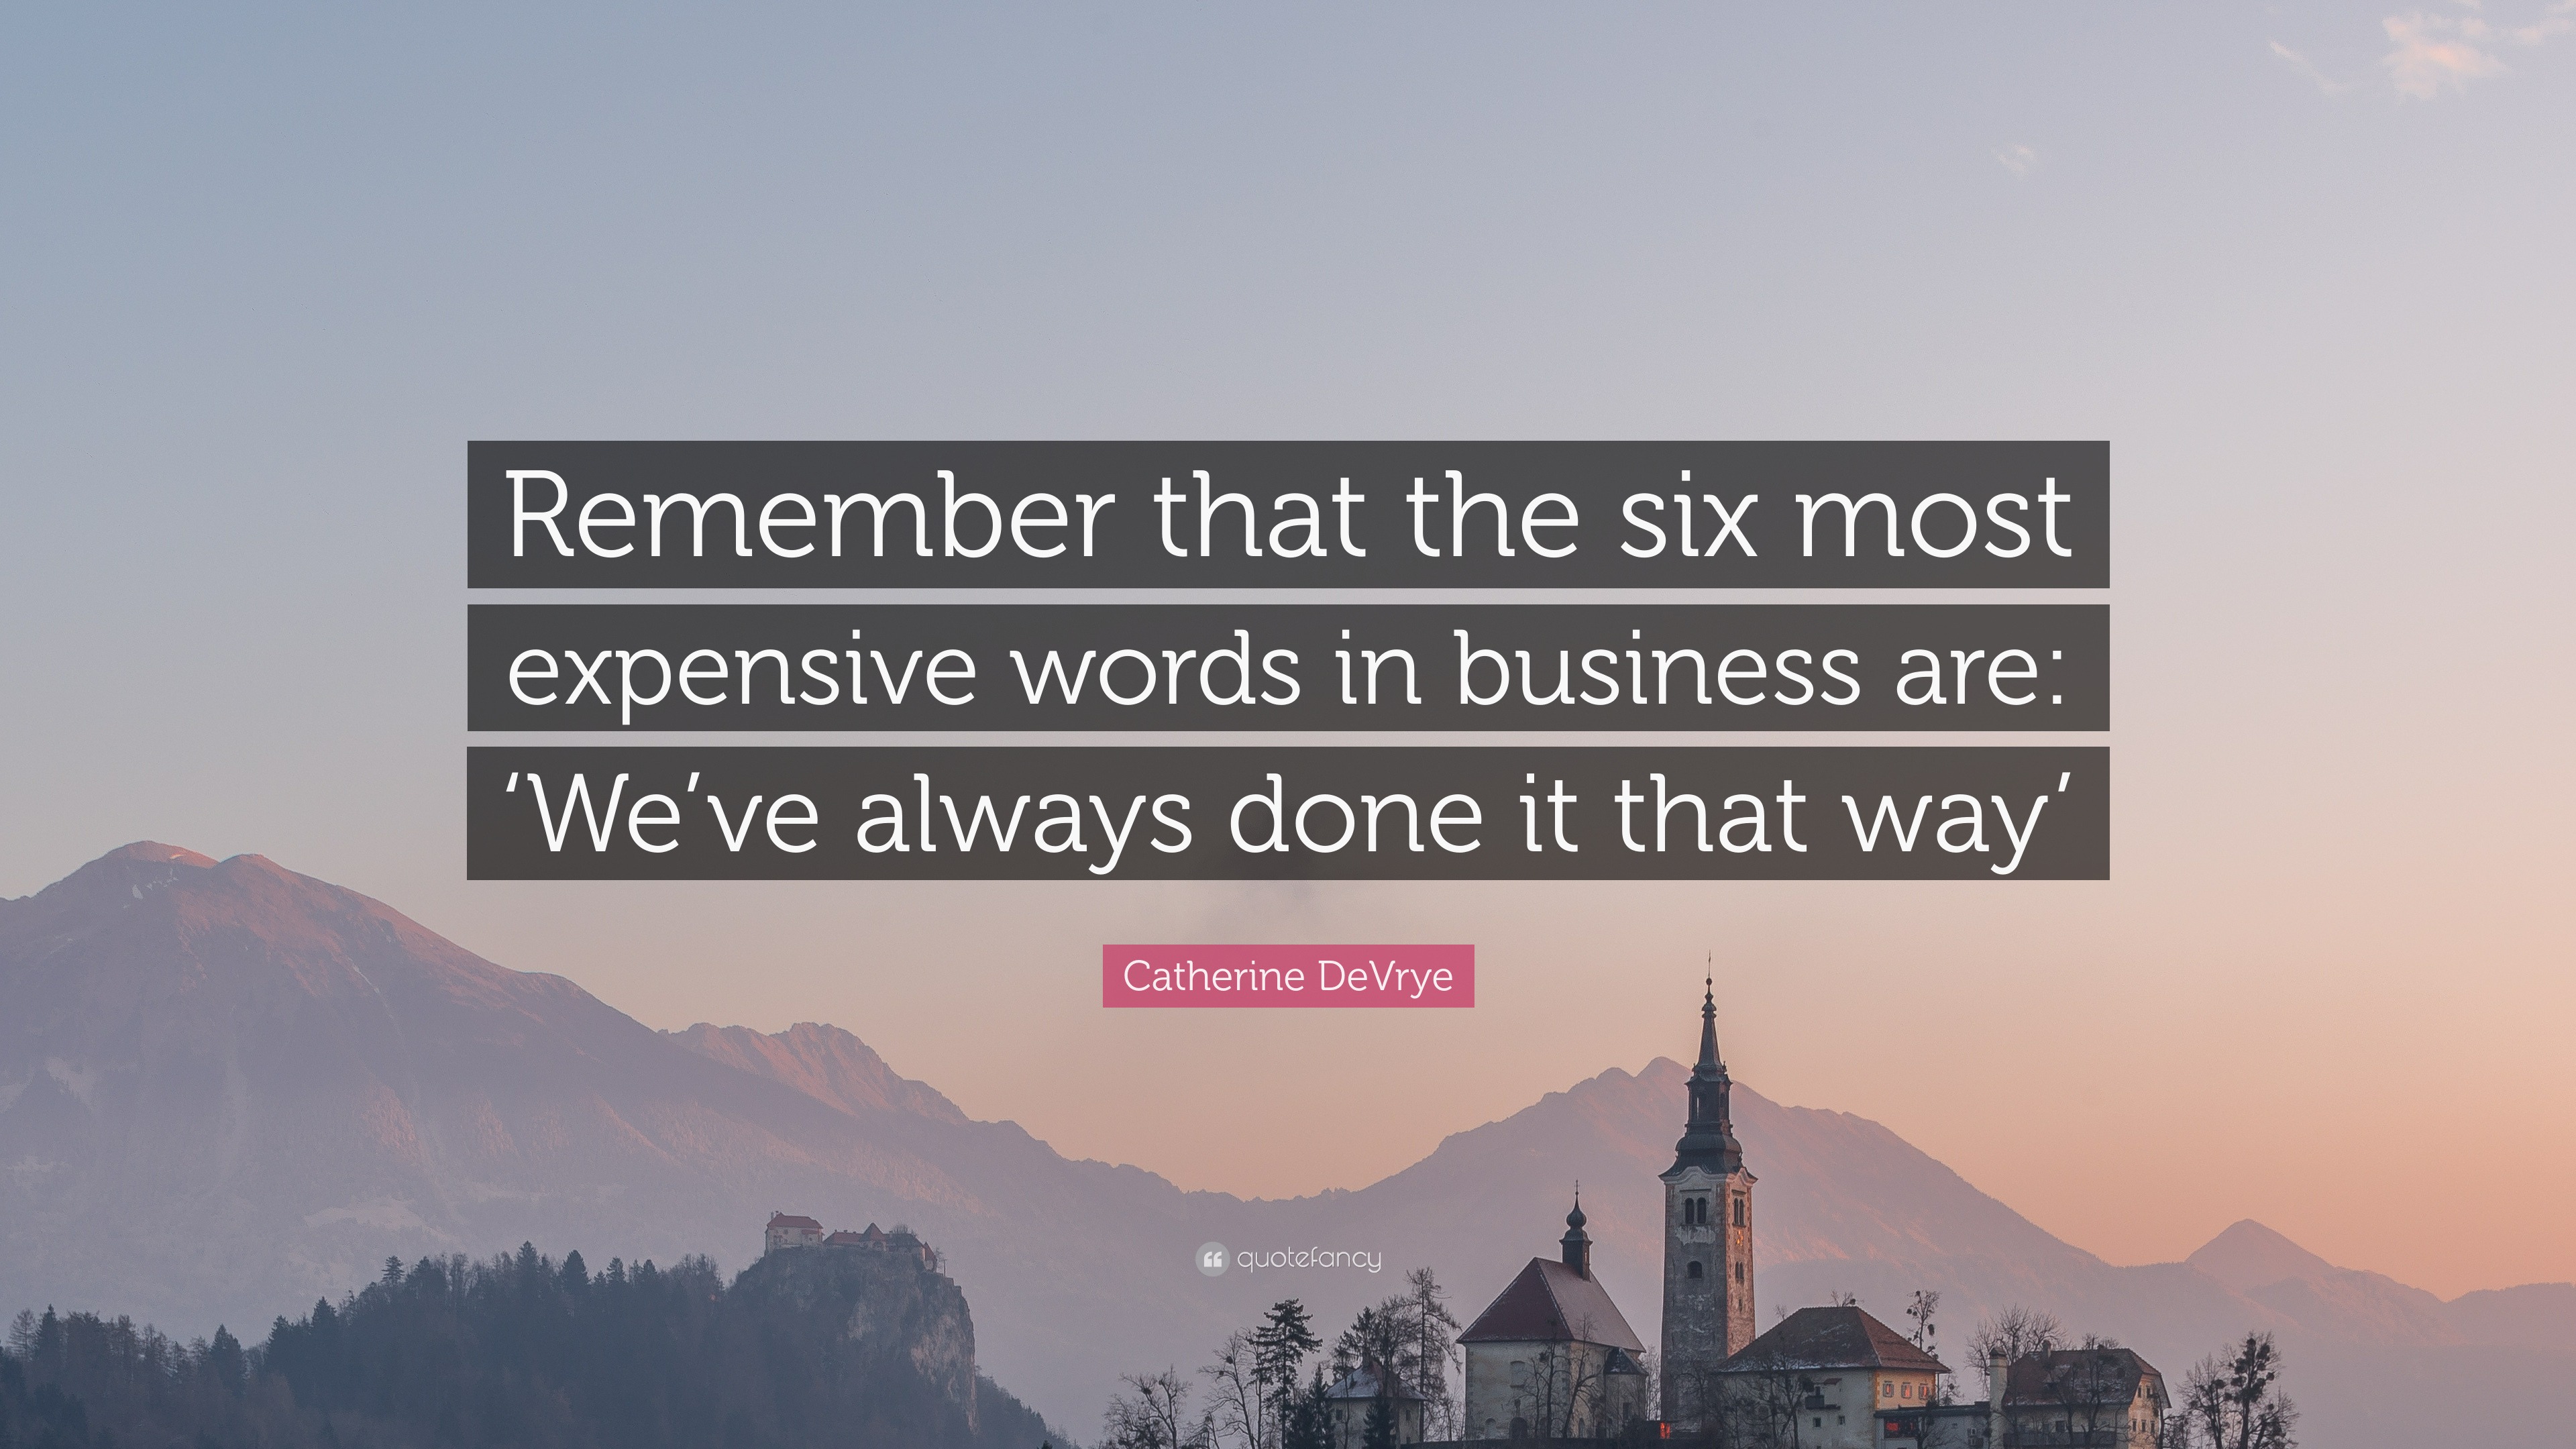 Catherine DeVrye Quote: “Remember that the six most expensive words in